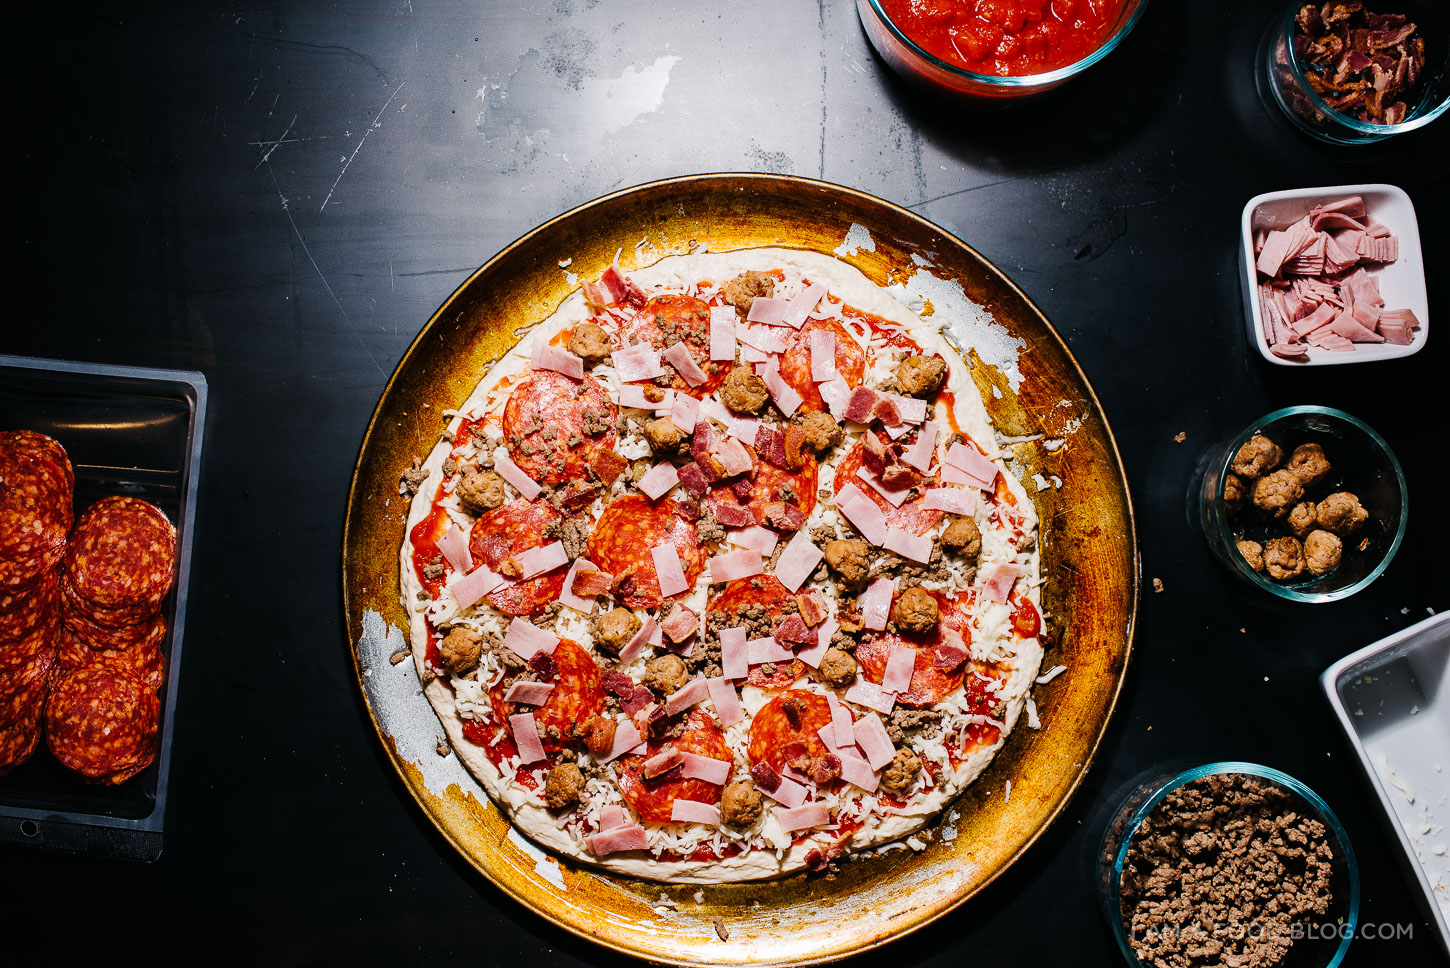 the ultimate meat lovers pizza - www.iamafoodblog.com